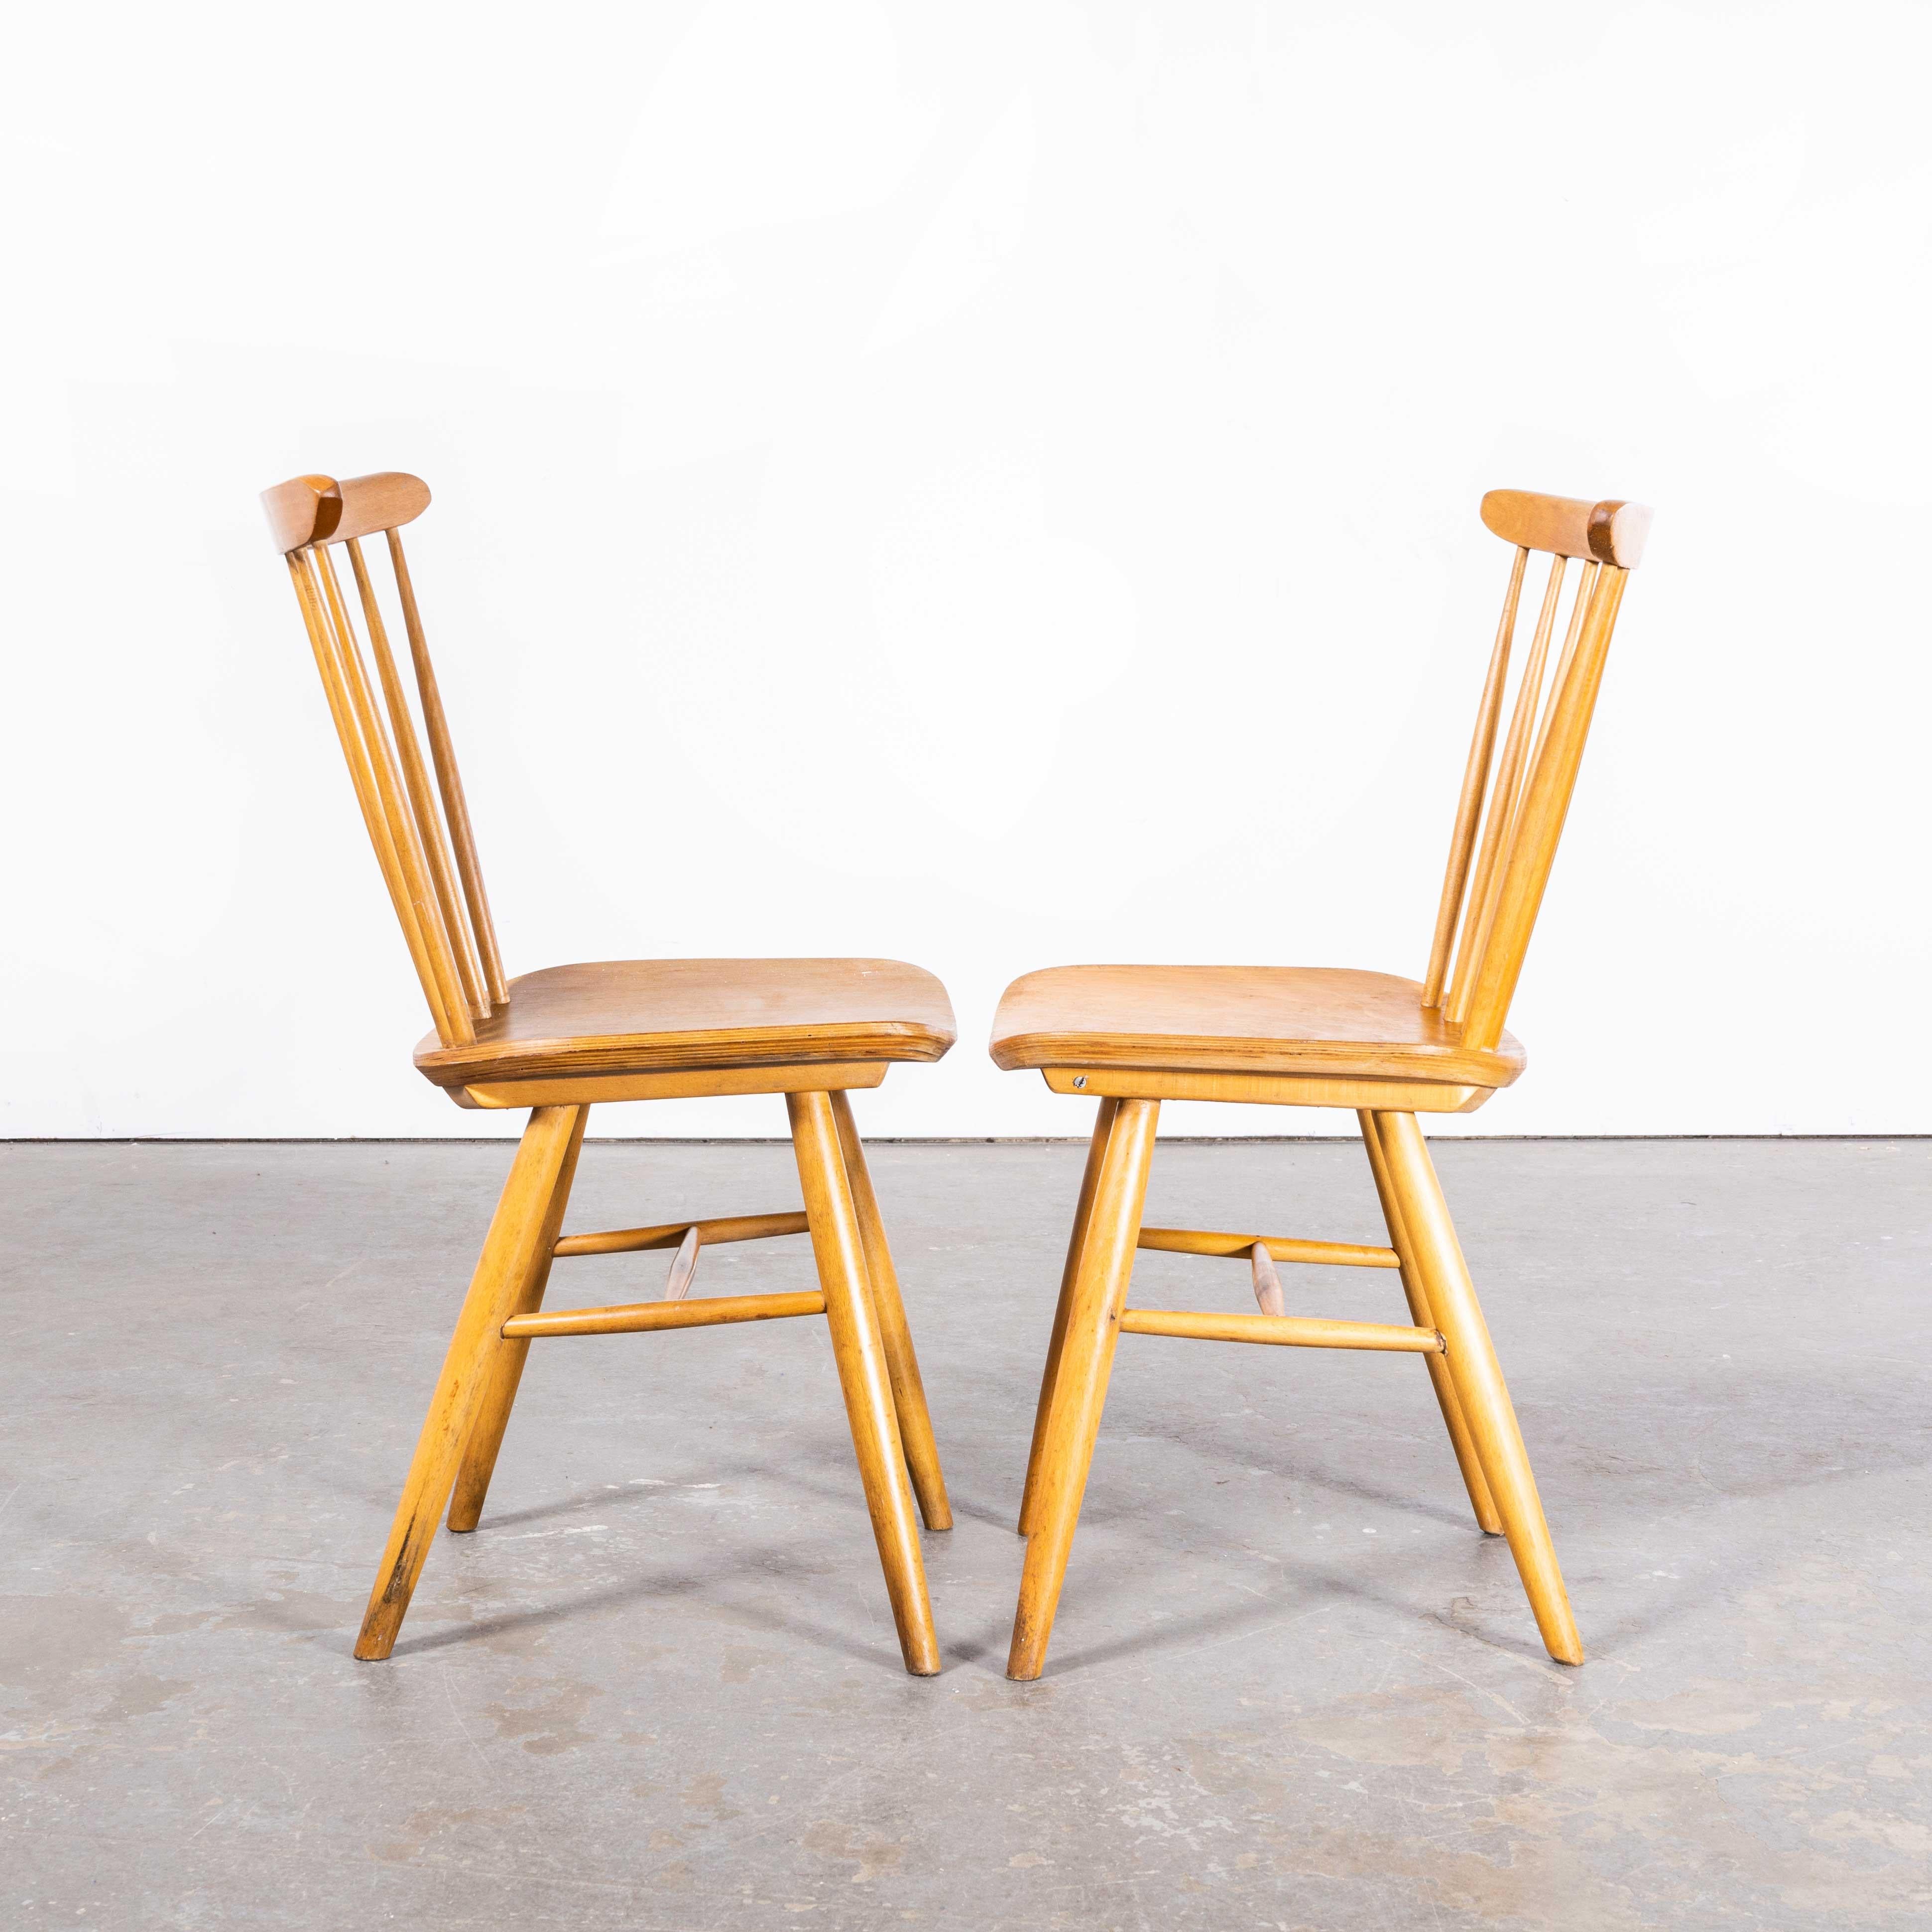 1950 Honey Oak Stickback Chairs, Saddle Seat, by Ton, Pair For Sale 3